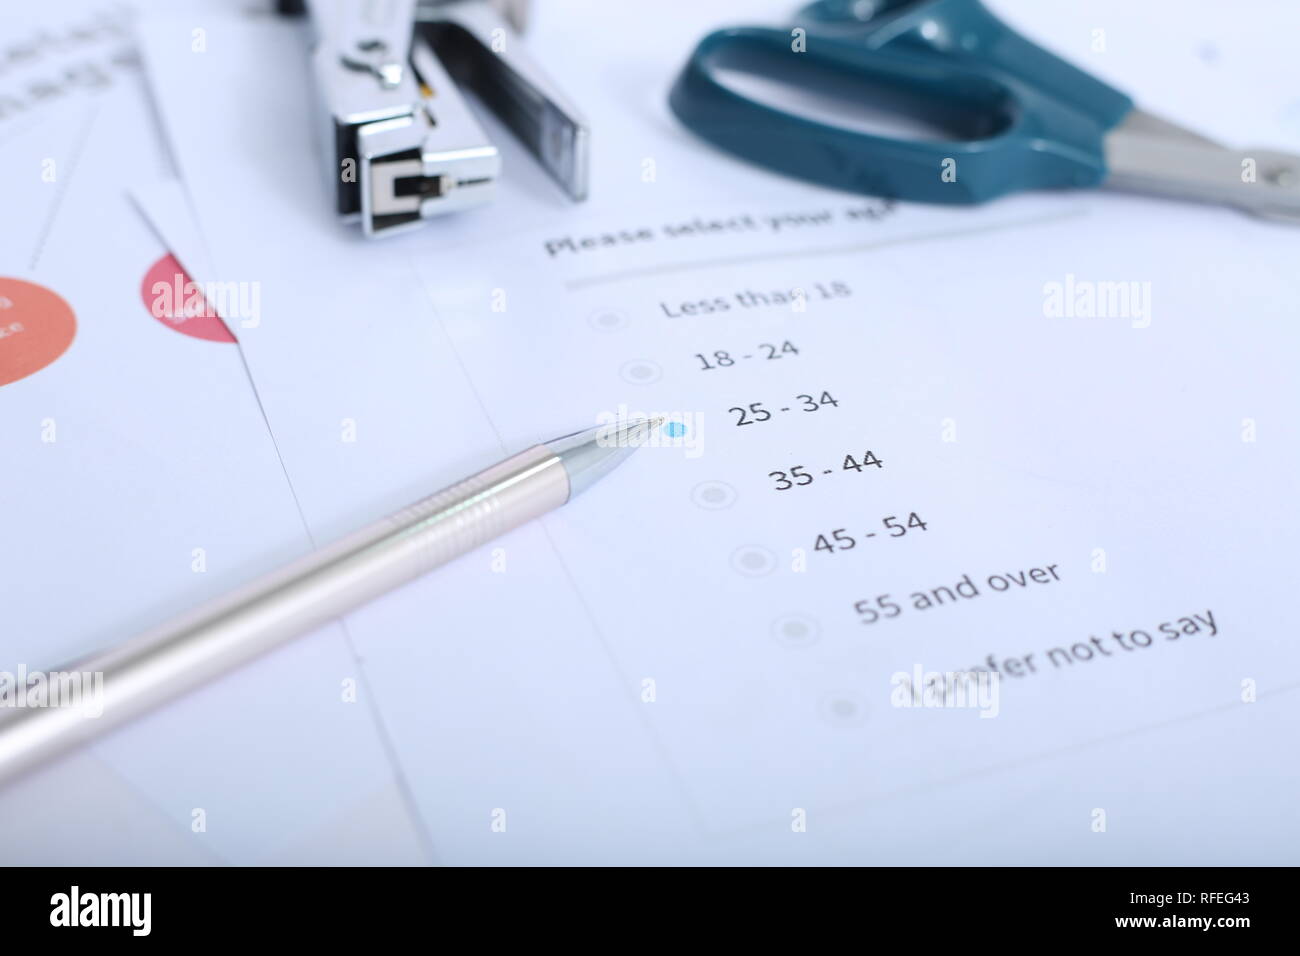 Picture of pen, stapler and scissor on the form. Stock Photo